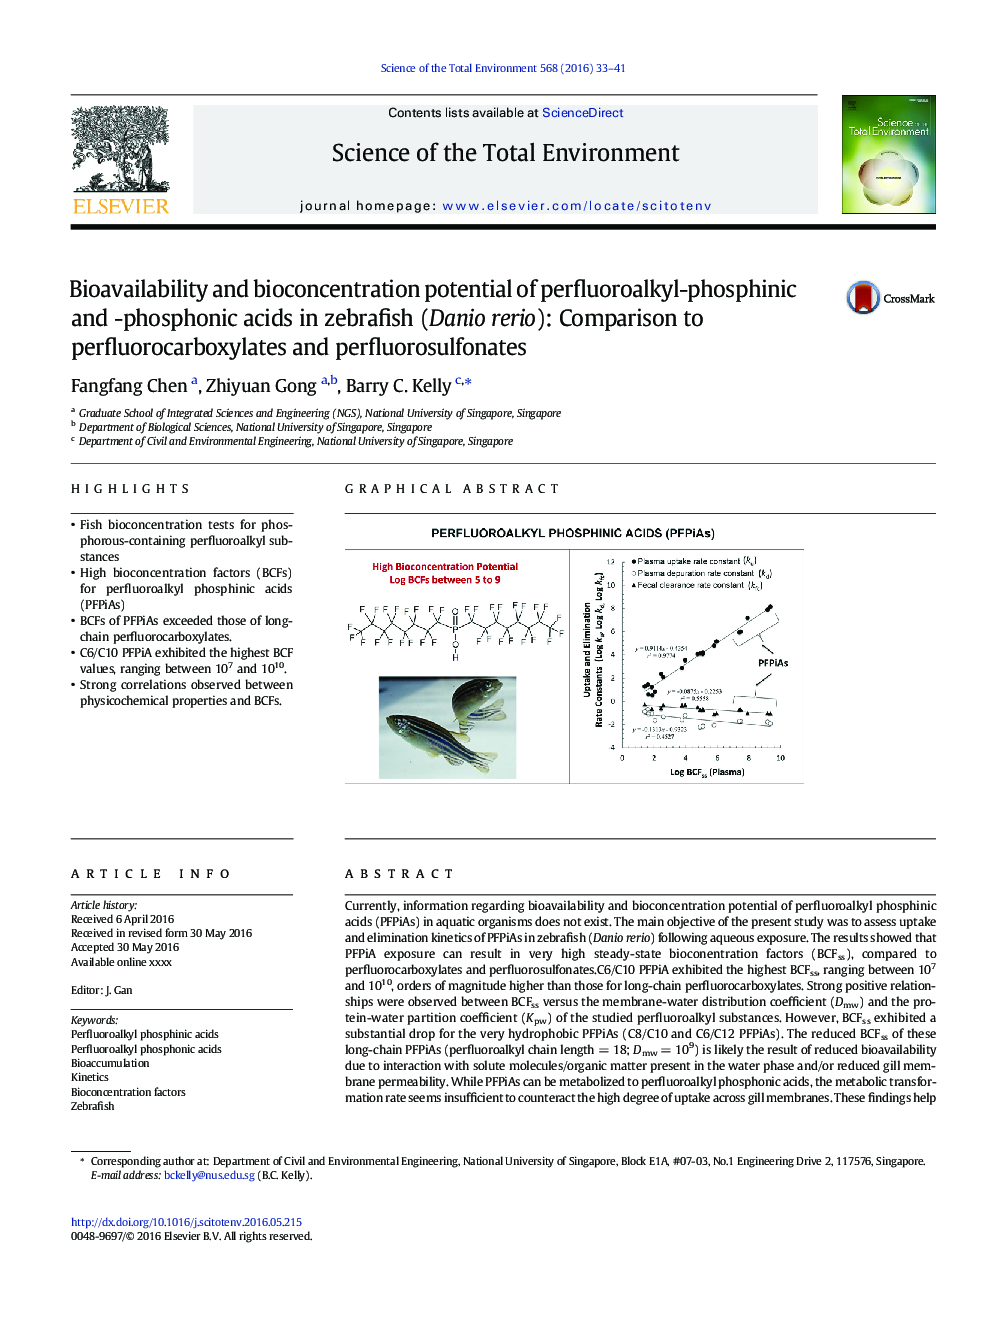 Bioavailability and bioconcentration potential of perfluoroalkyl-phosphinic and -phosphonic acids in zebrafish (Danio rerio): Comparison to perfluorocarboxylates and perfluorosulfonates